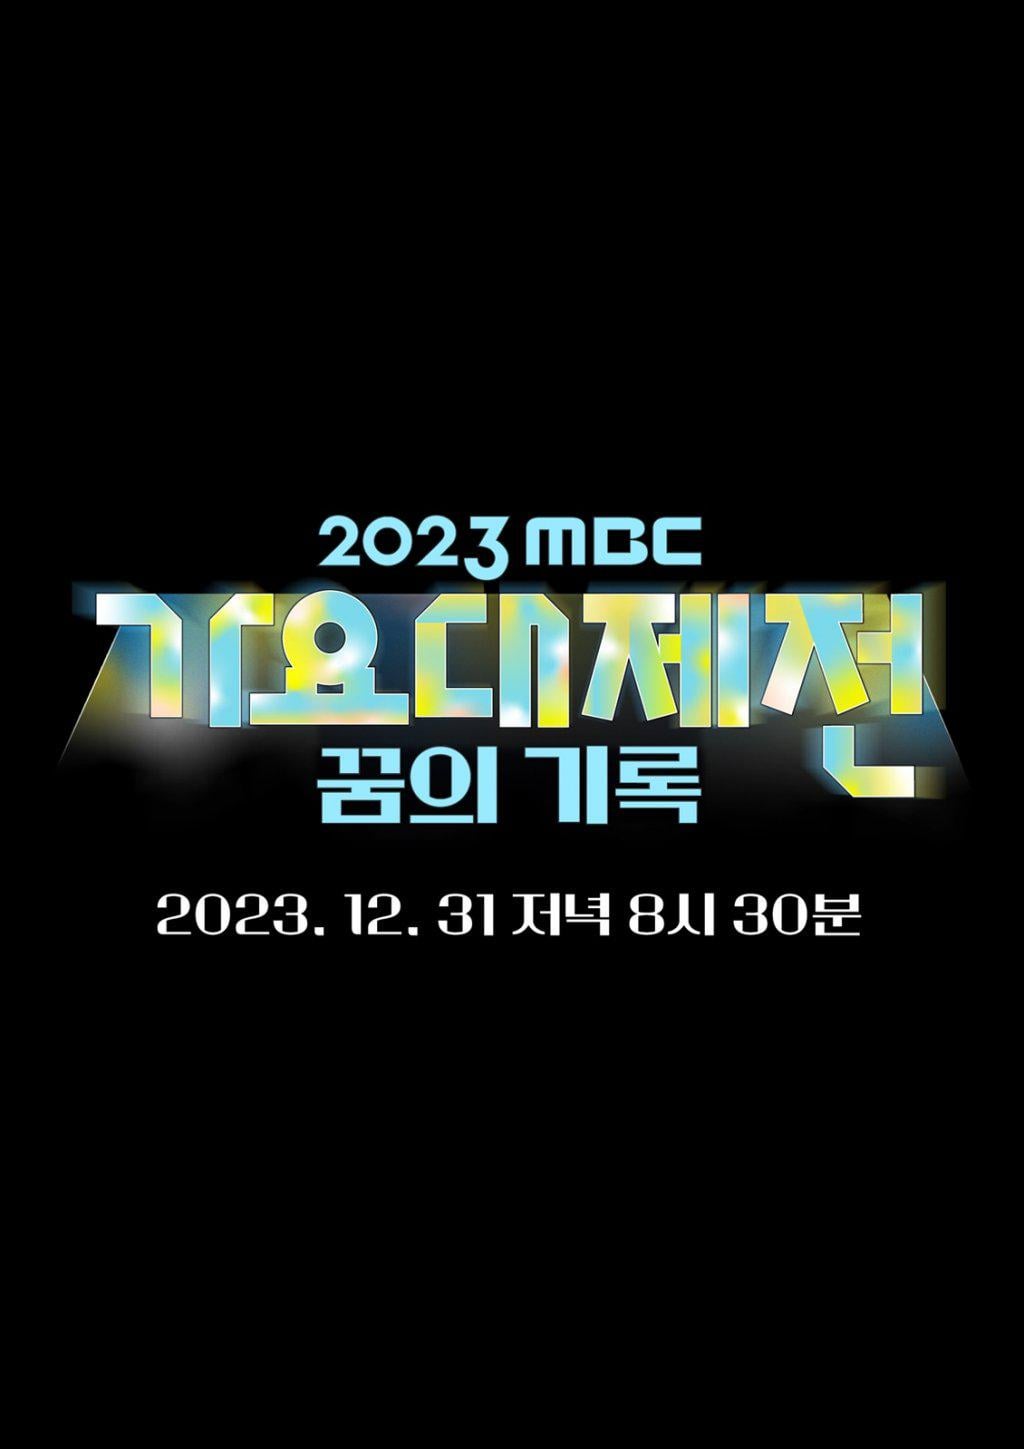 231219 aespa announced as part of the lineup for 2023 MBC Gayo Daejeon on December 31st